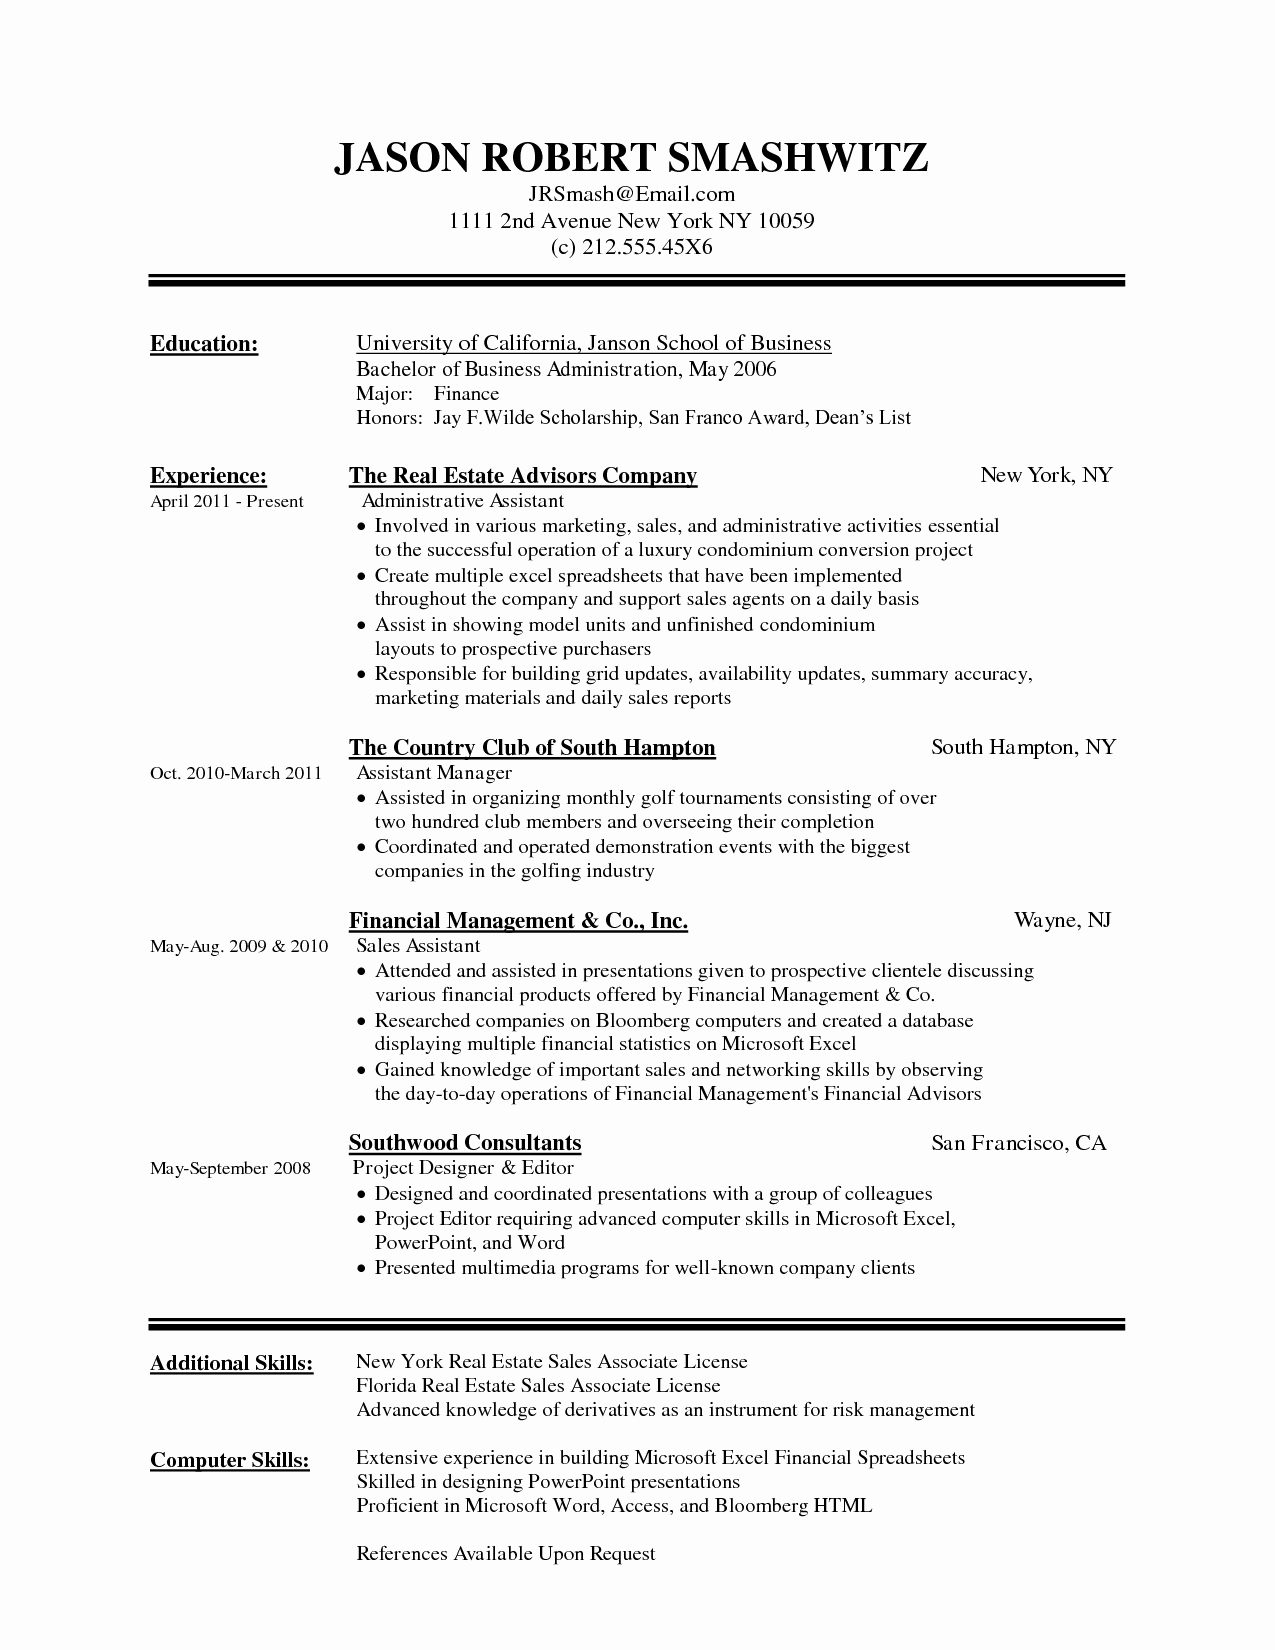 Ms Office Templates for Word Luxury Microsoft Word Resume Templates